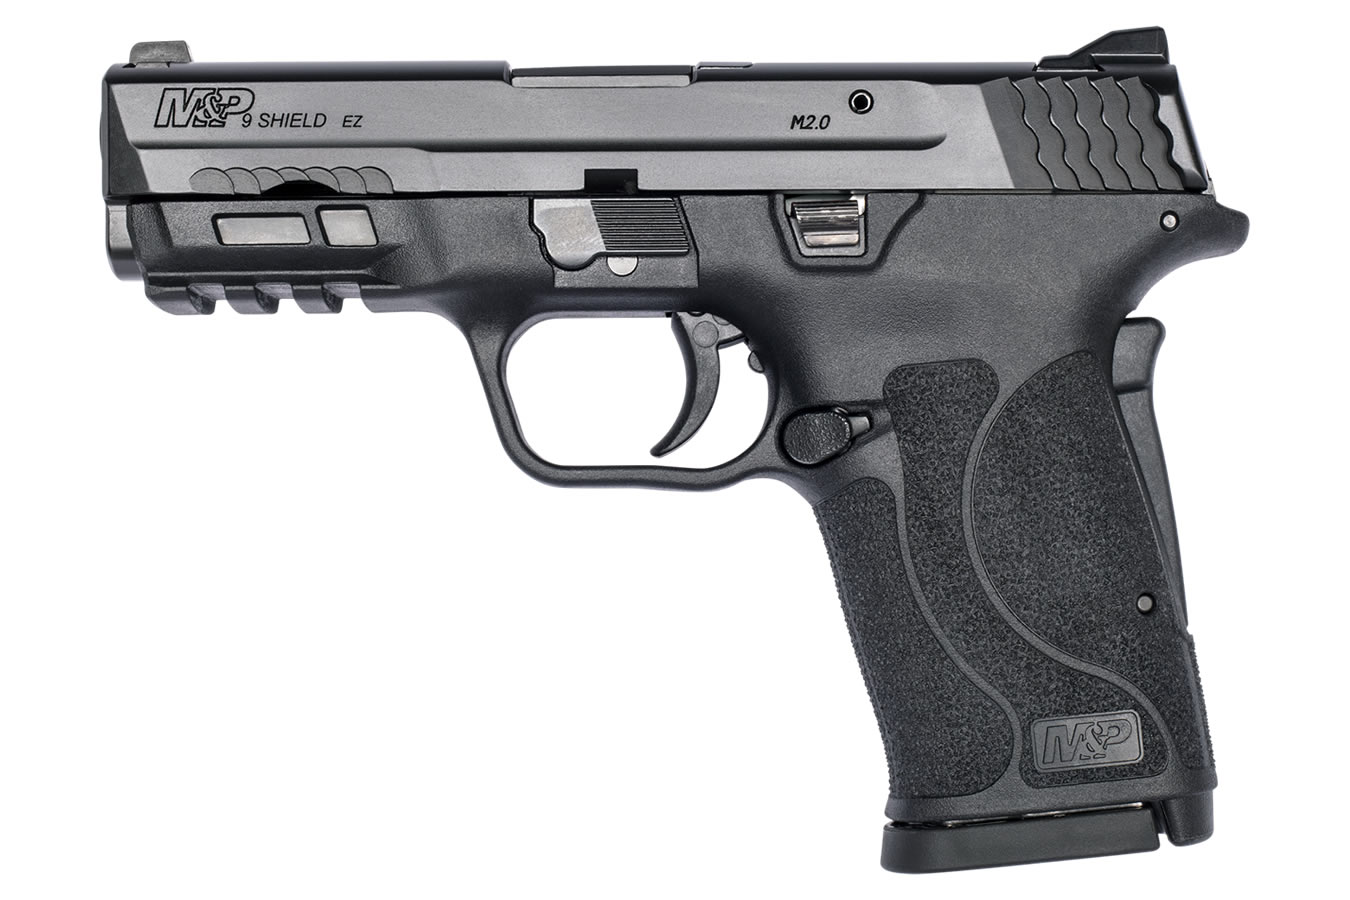 SMITH AND WESSON MP9 M2.0 SHIELD EZ NO THUMB SAFETY